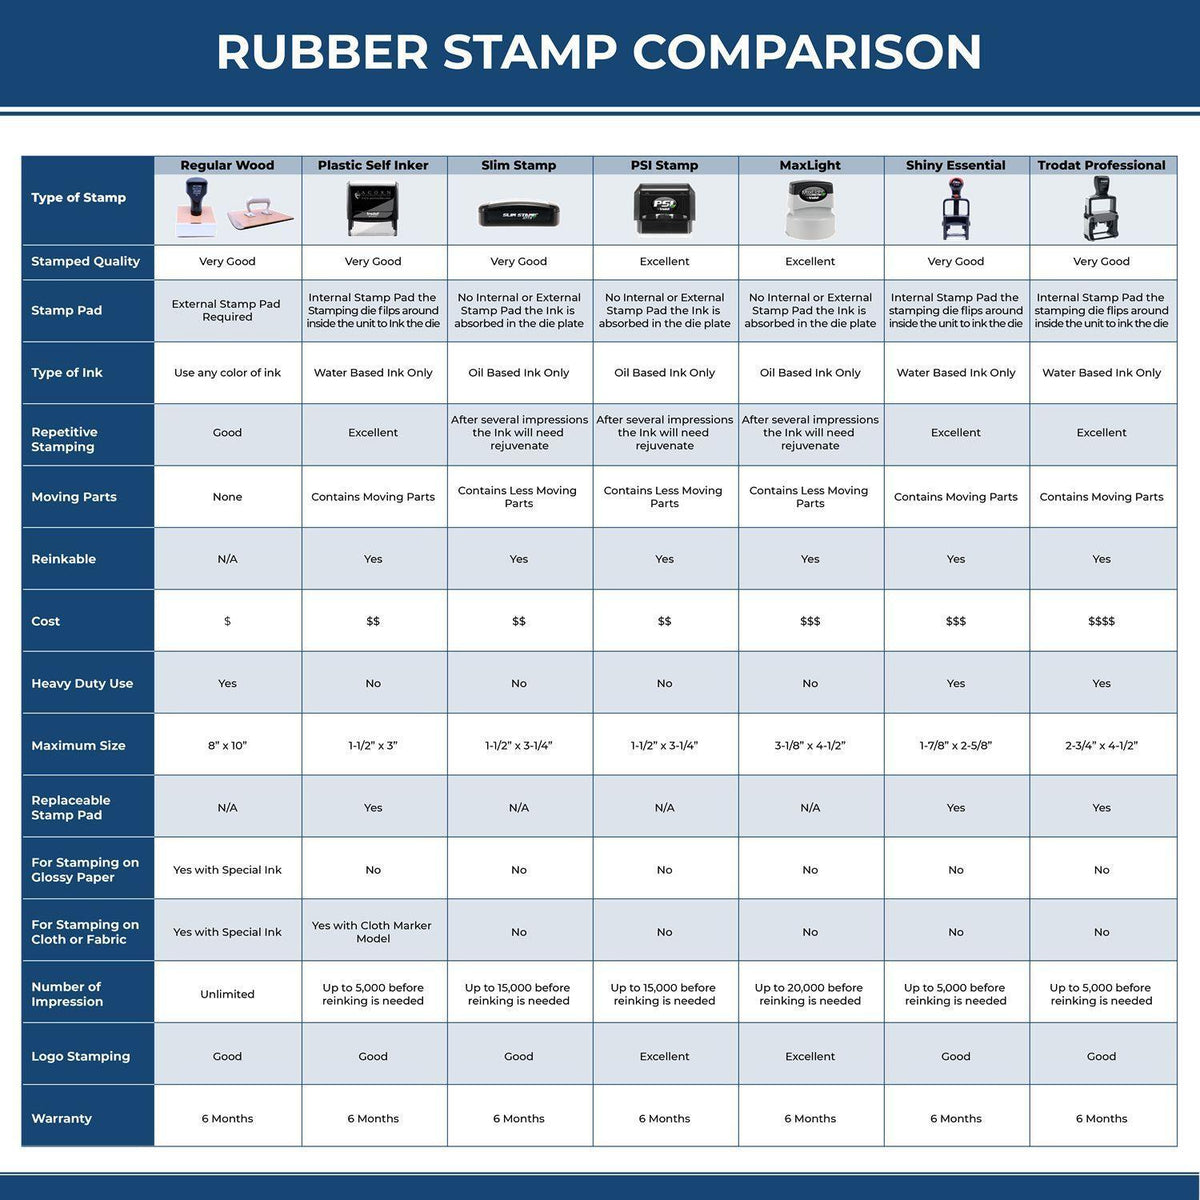 Large Closing Statement Rubber Stamp 4594R Rubber Stamp Comparison